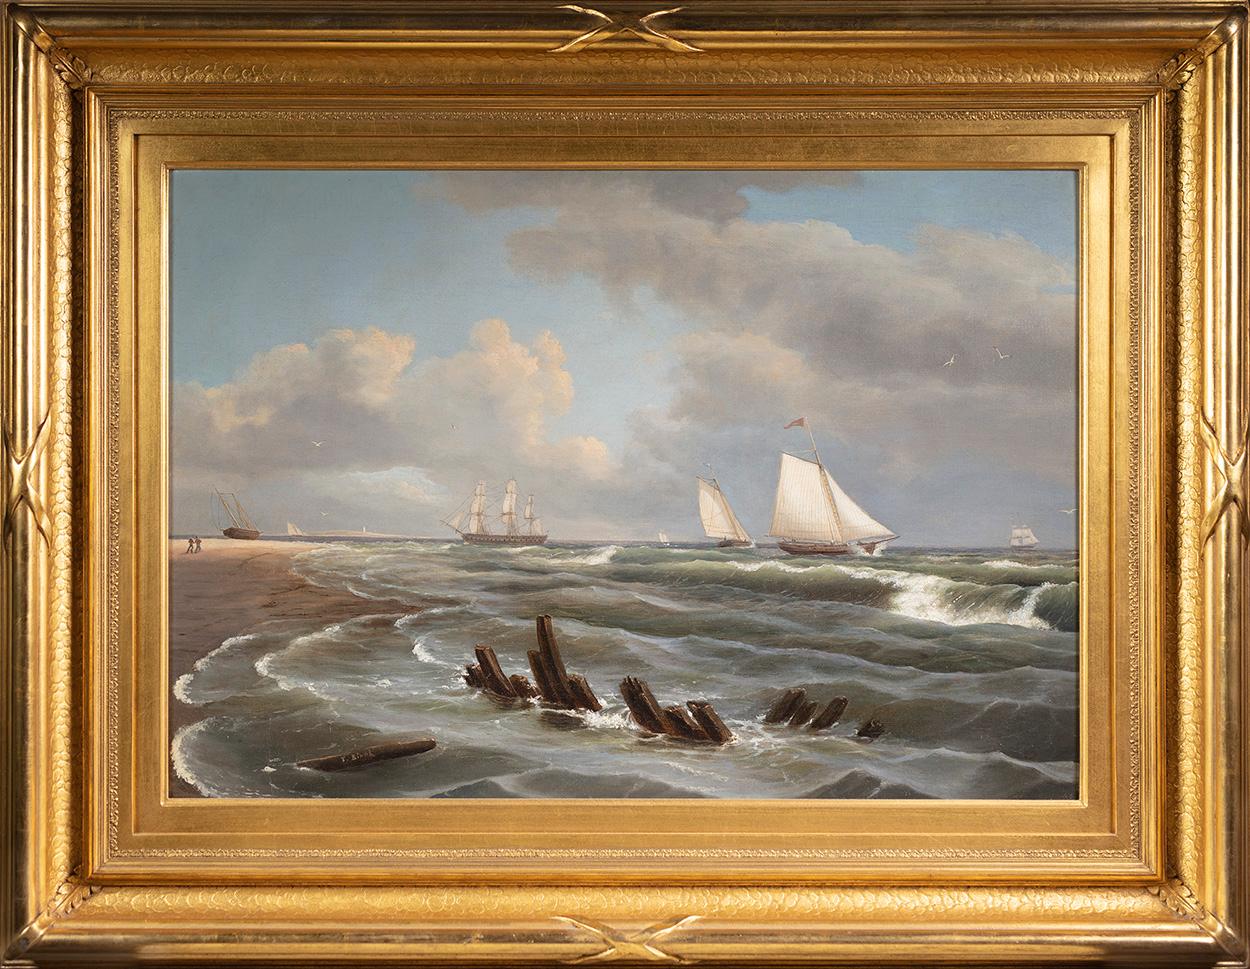 Coastal Scene with Ships on Ocean - Painting by Thomas Birch